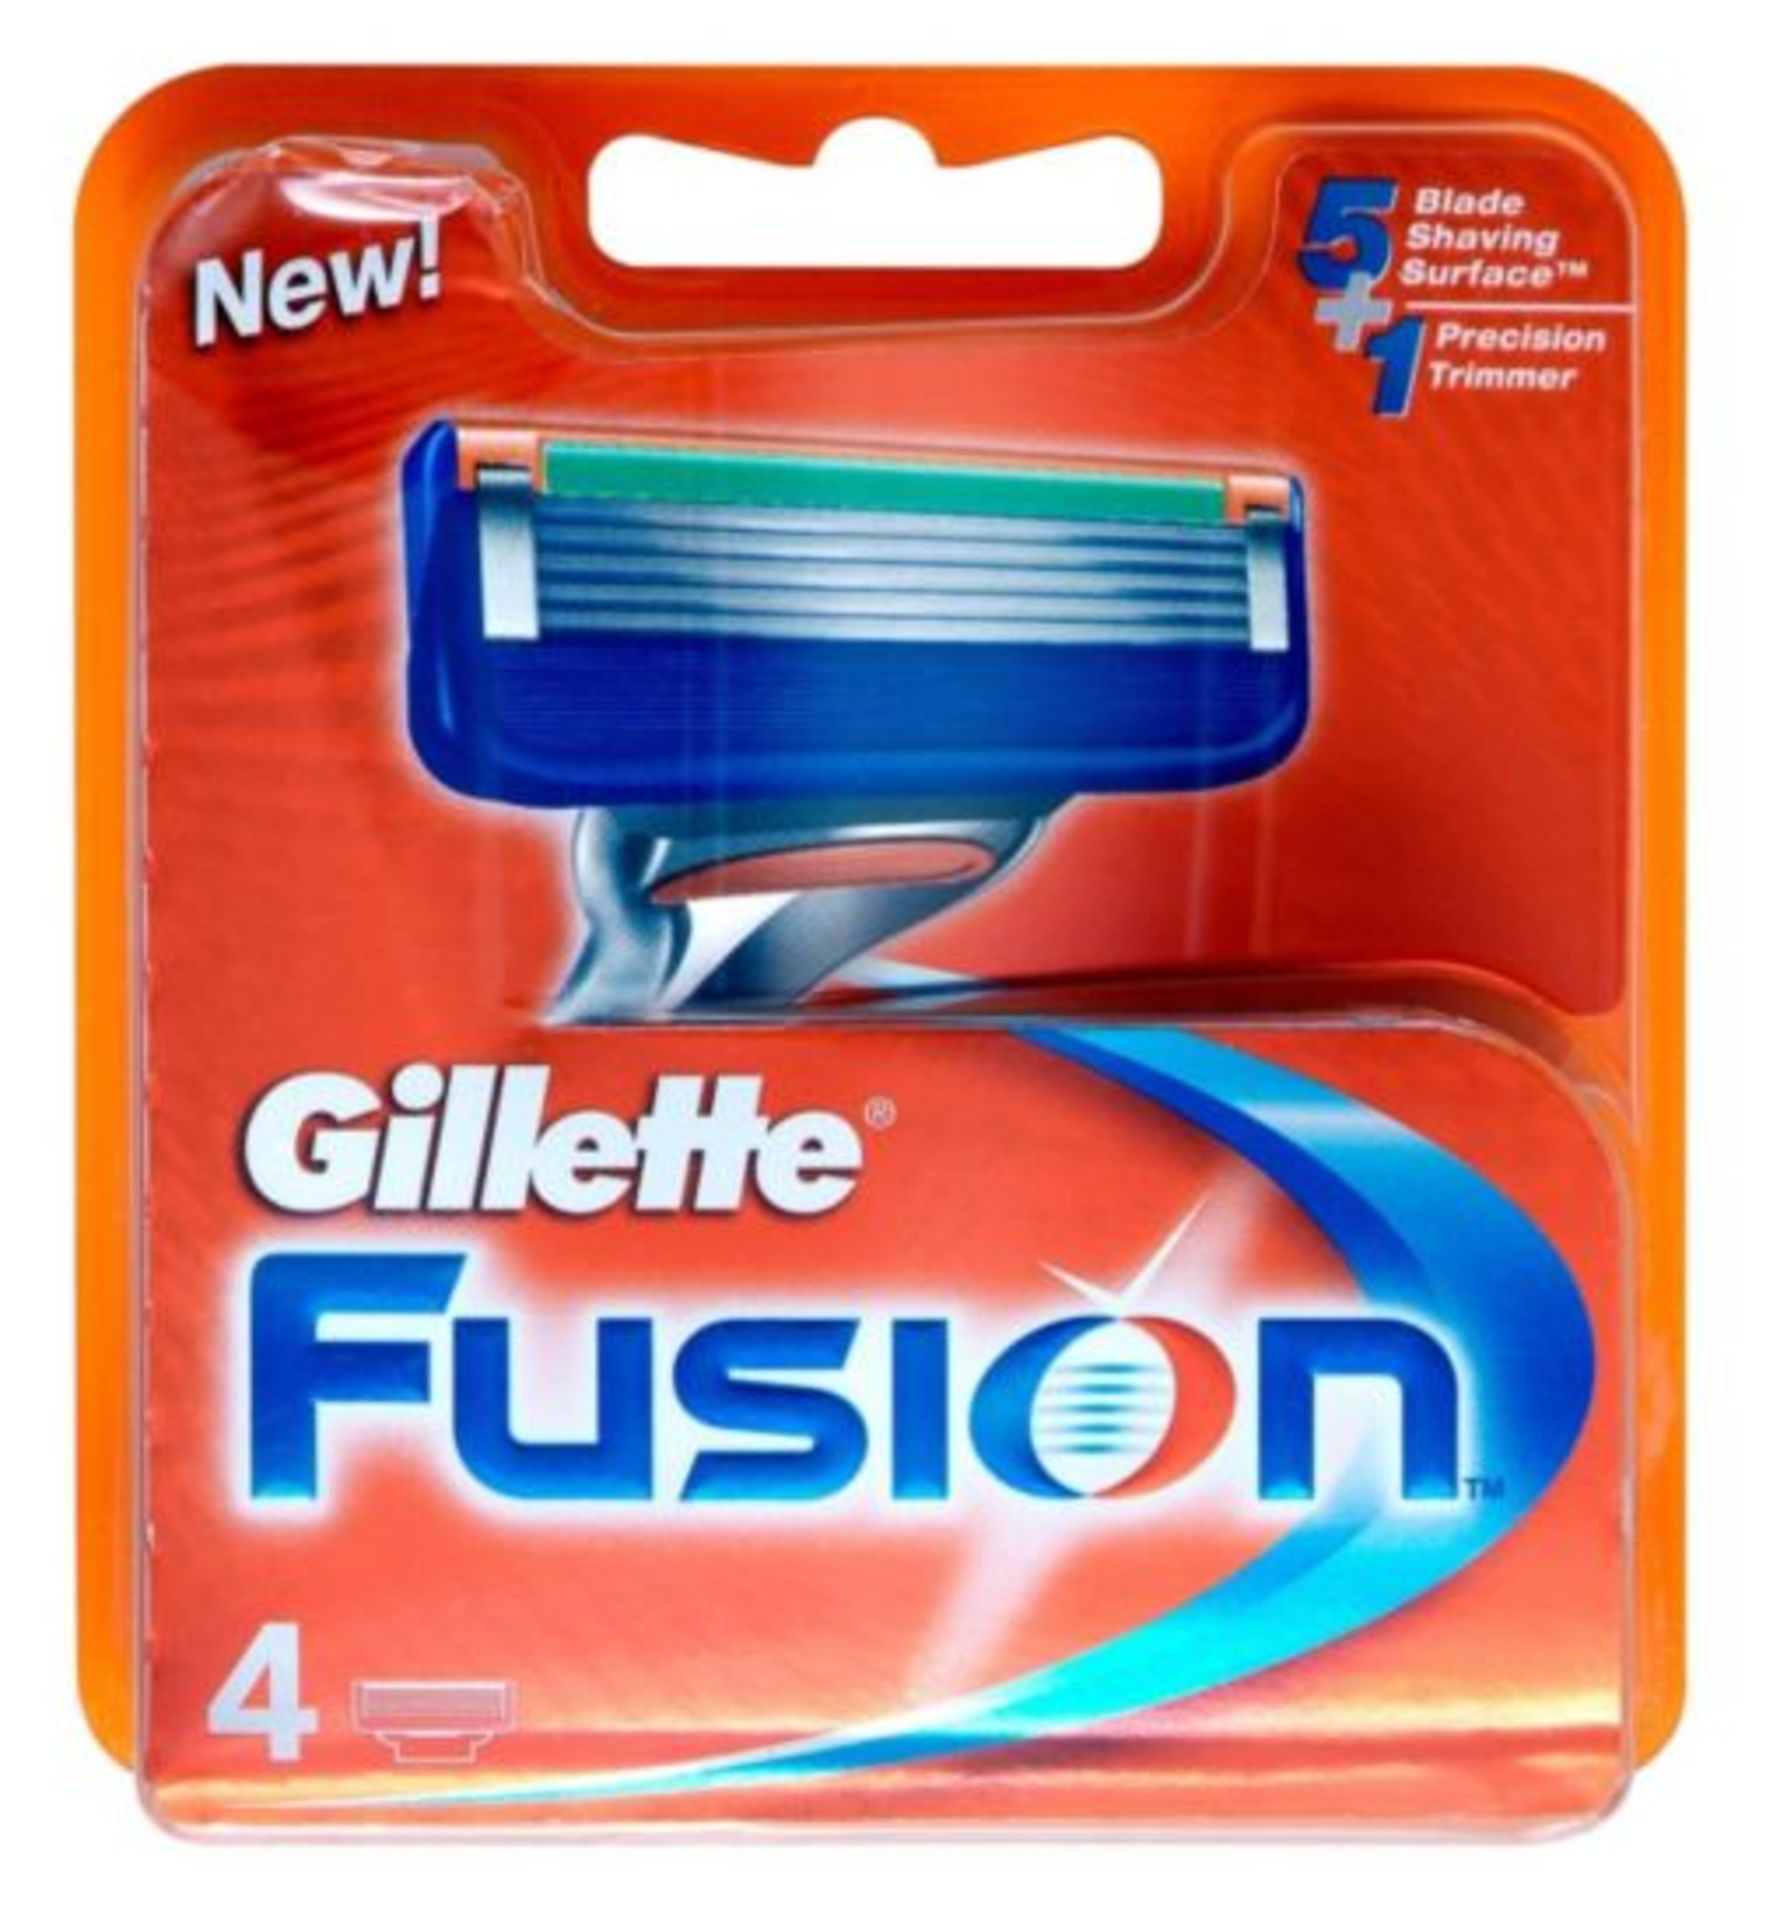 V *TRADE QTY* Brand New Gillette Fusion Razor Blades 4 Pack RRP: £13.98 X 4 Bid price to be